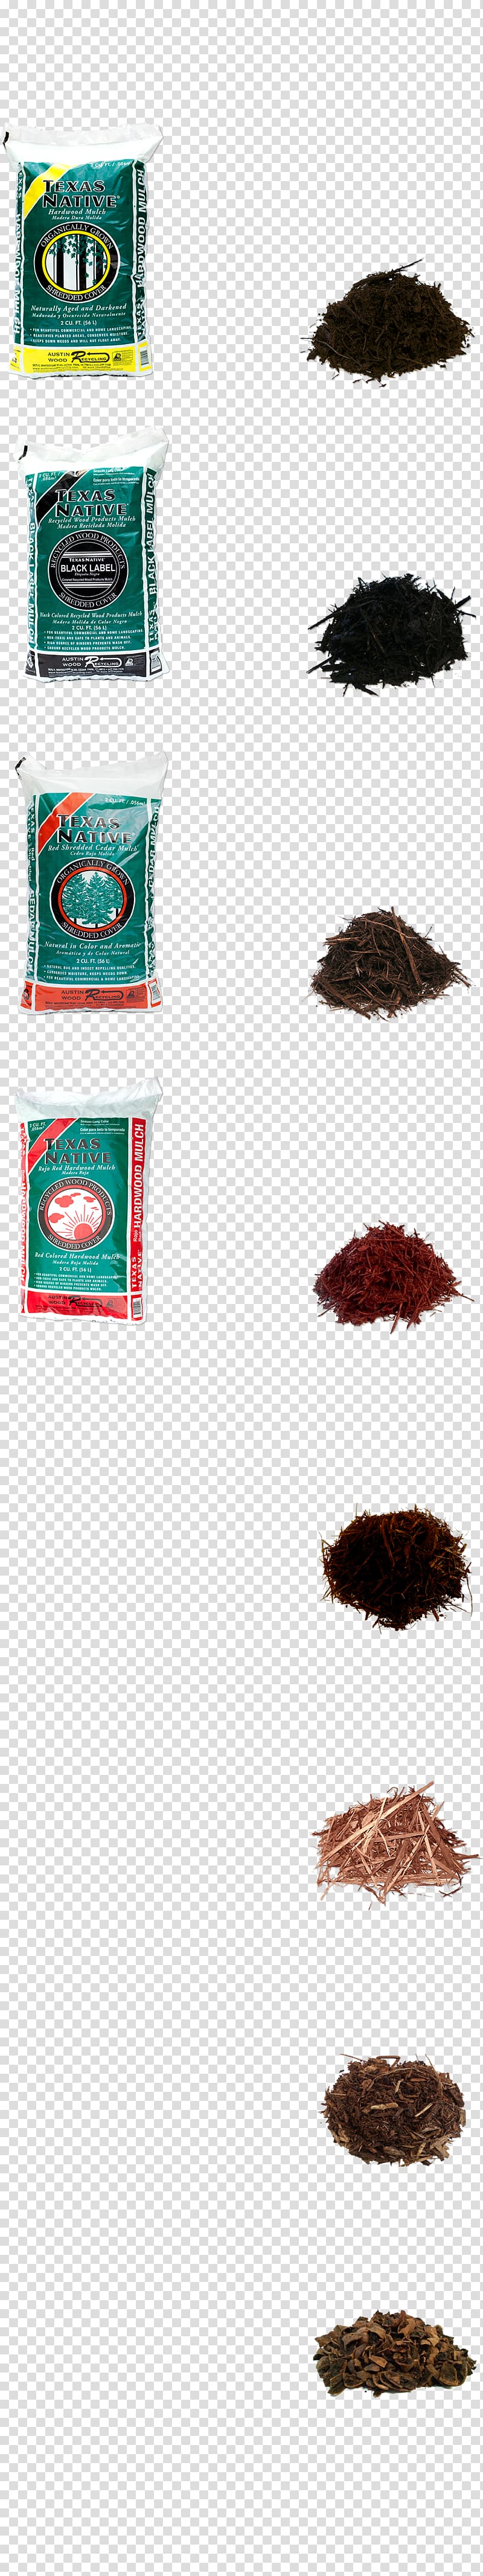 Mulch Soil Nutrient Austin Wood Recycling Hummus, jujube transparent background PNG clipart